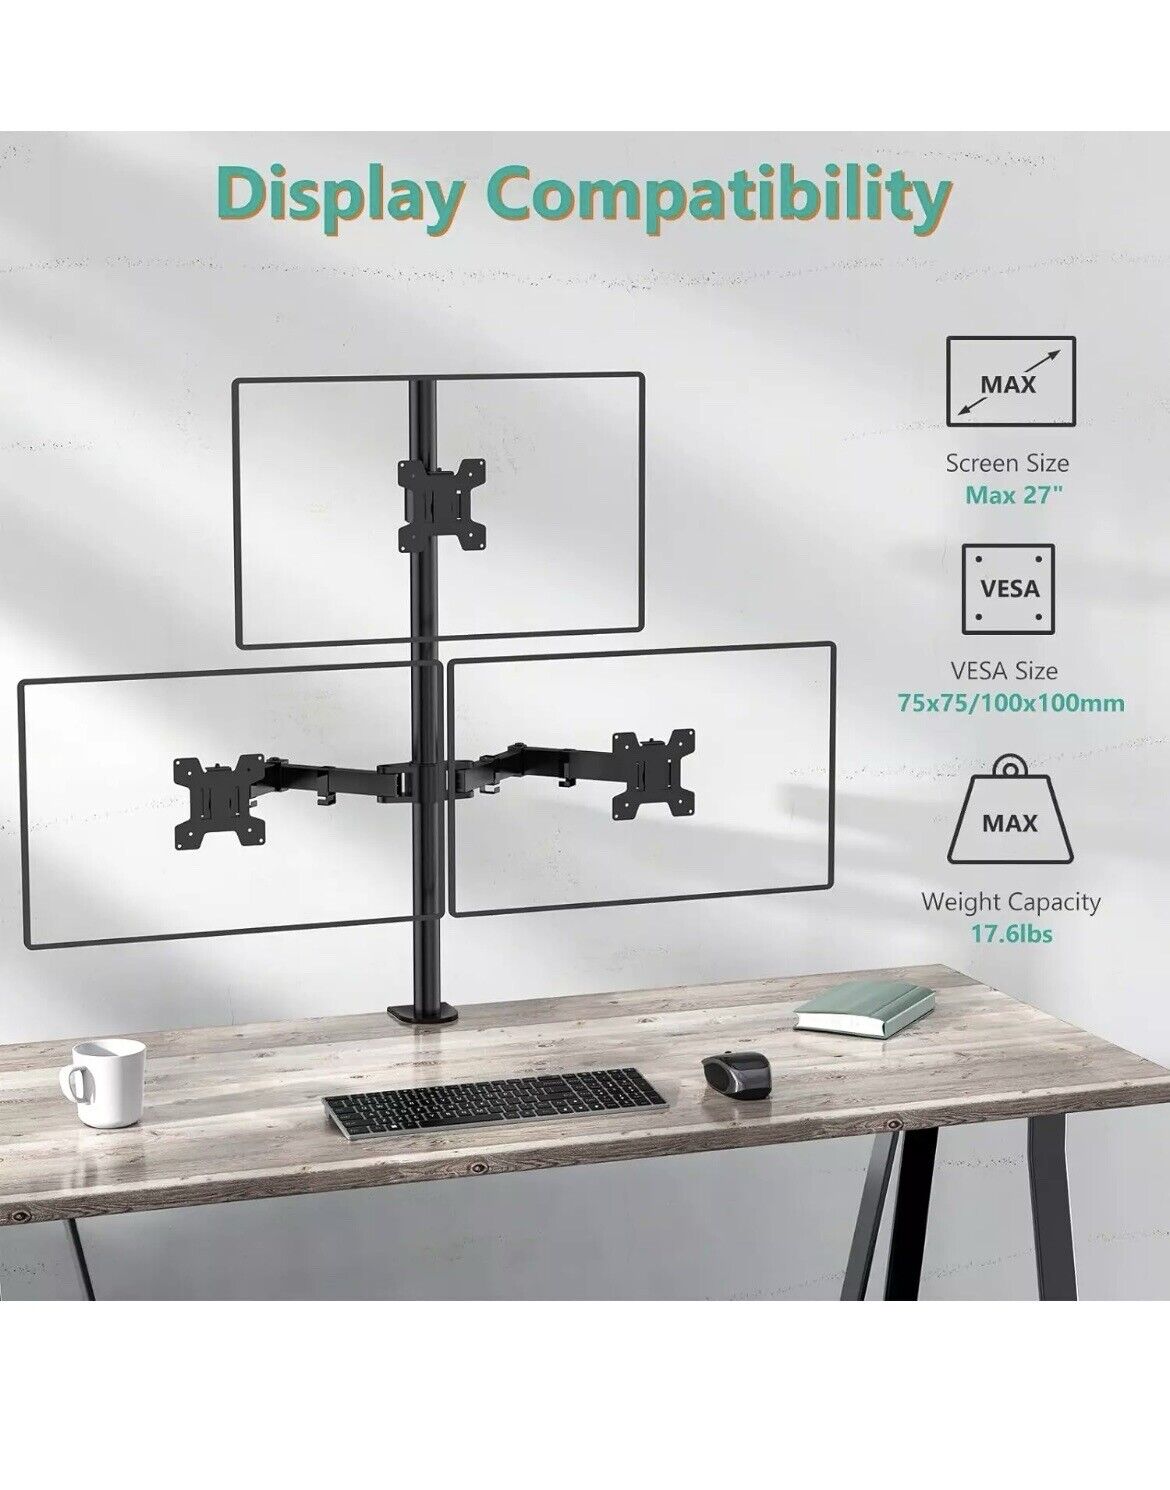 WALI Triple Monitor Desk Mount, Fully Adjustable Three Monitor Stand Fits 3 up